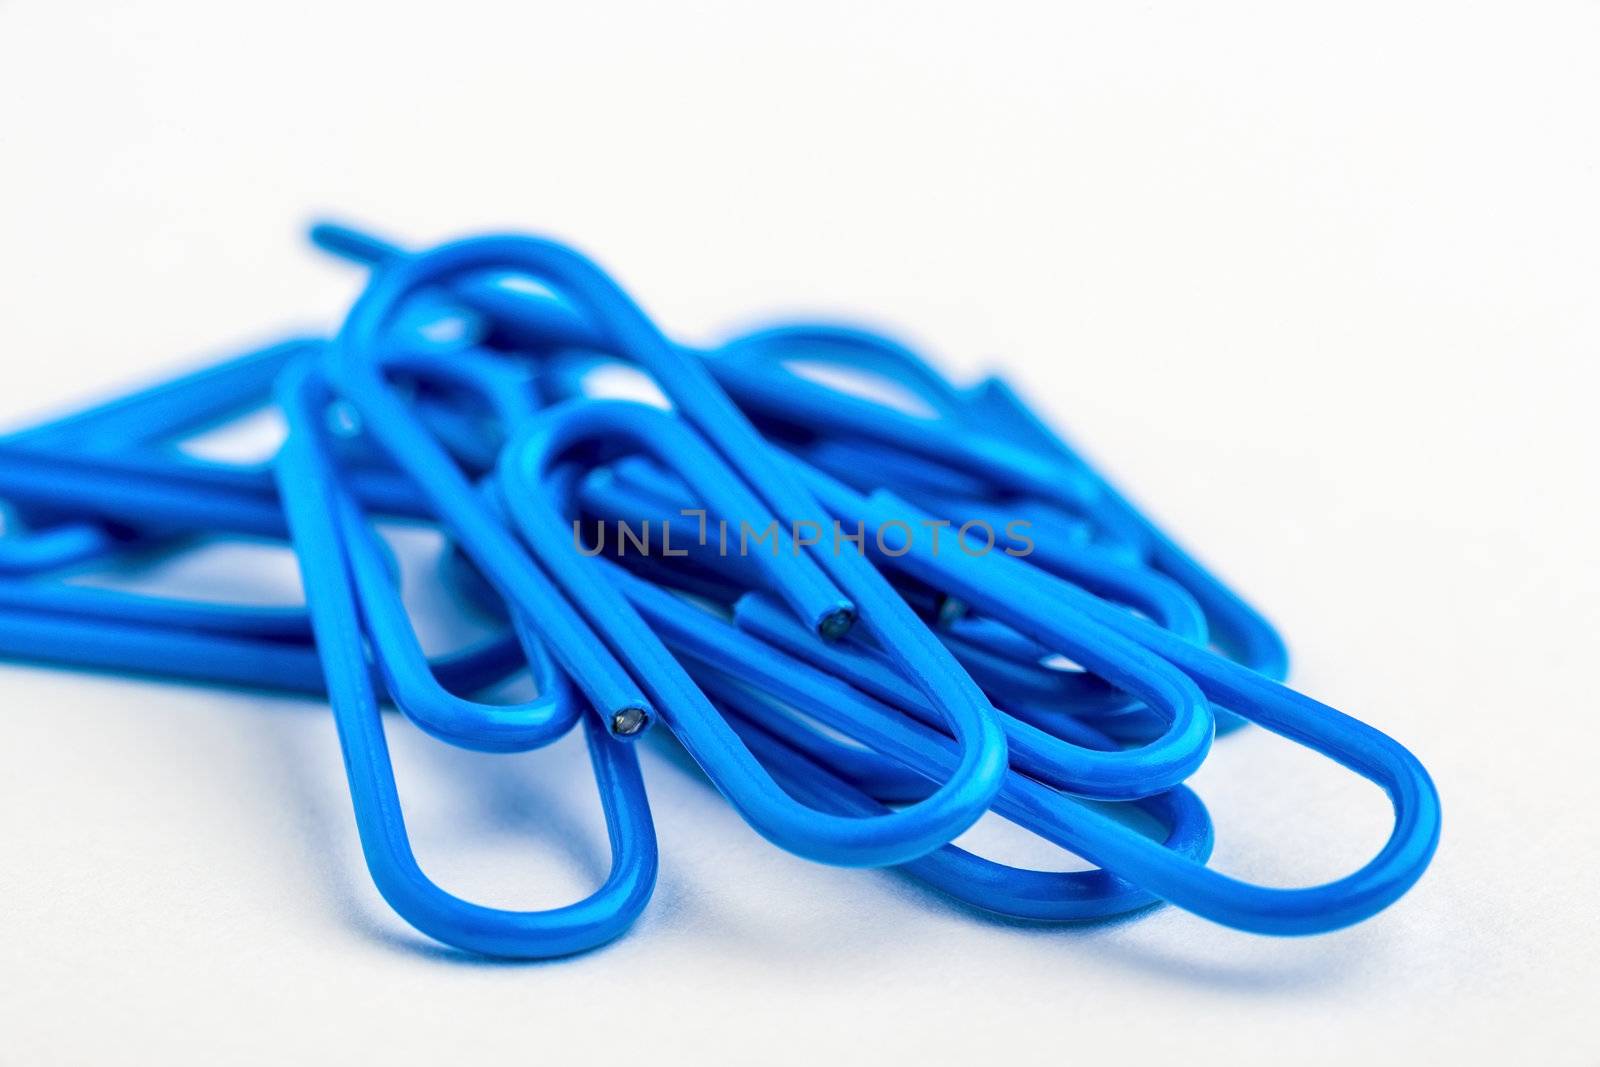 Blue paperclips on white background by w20er